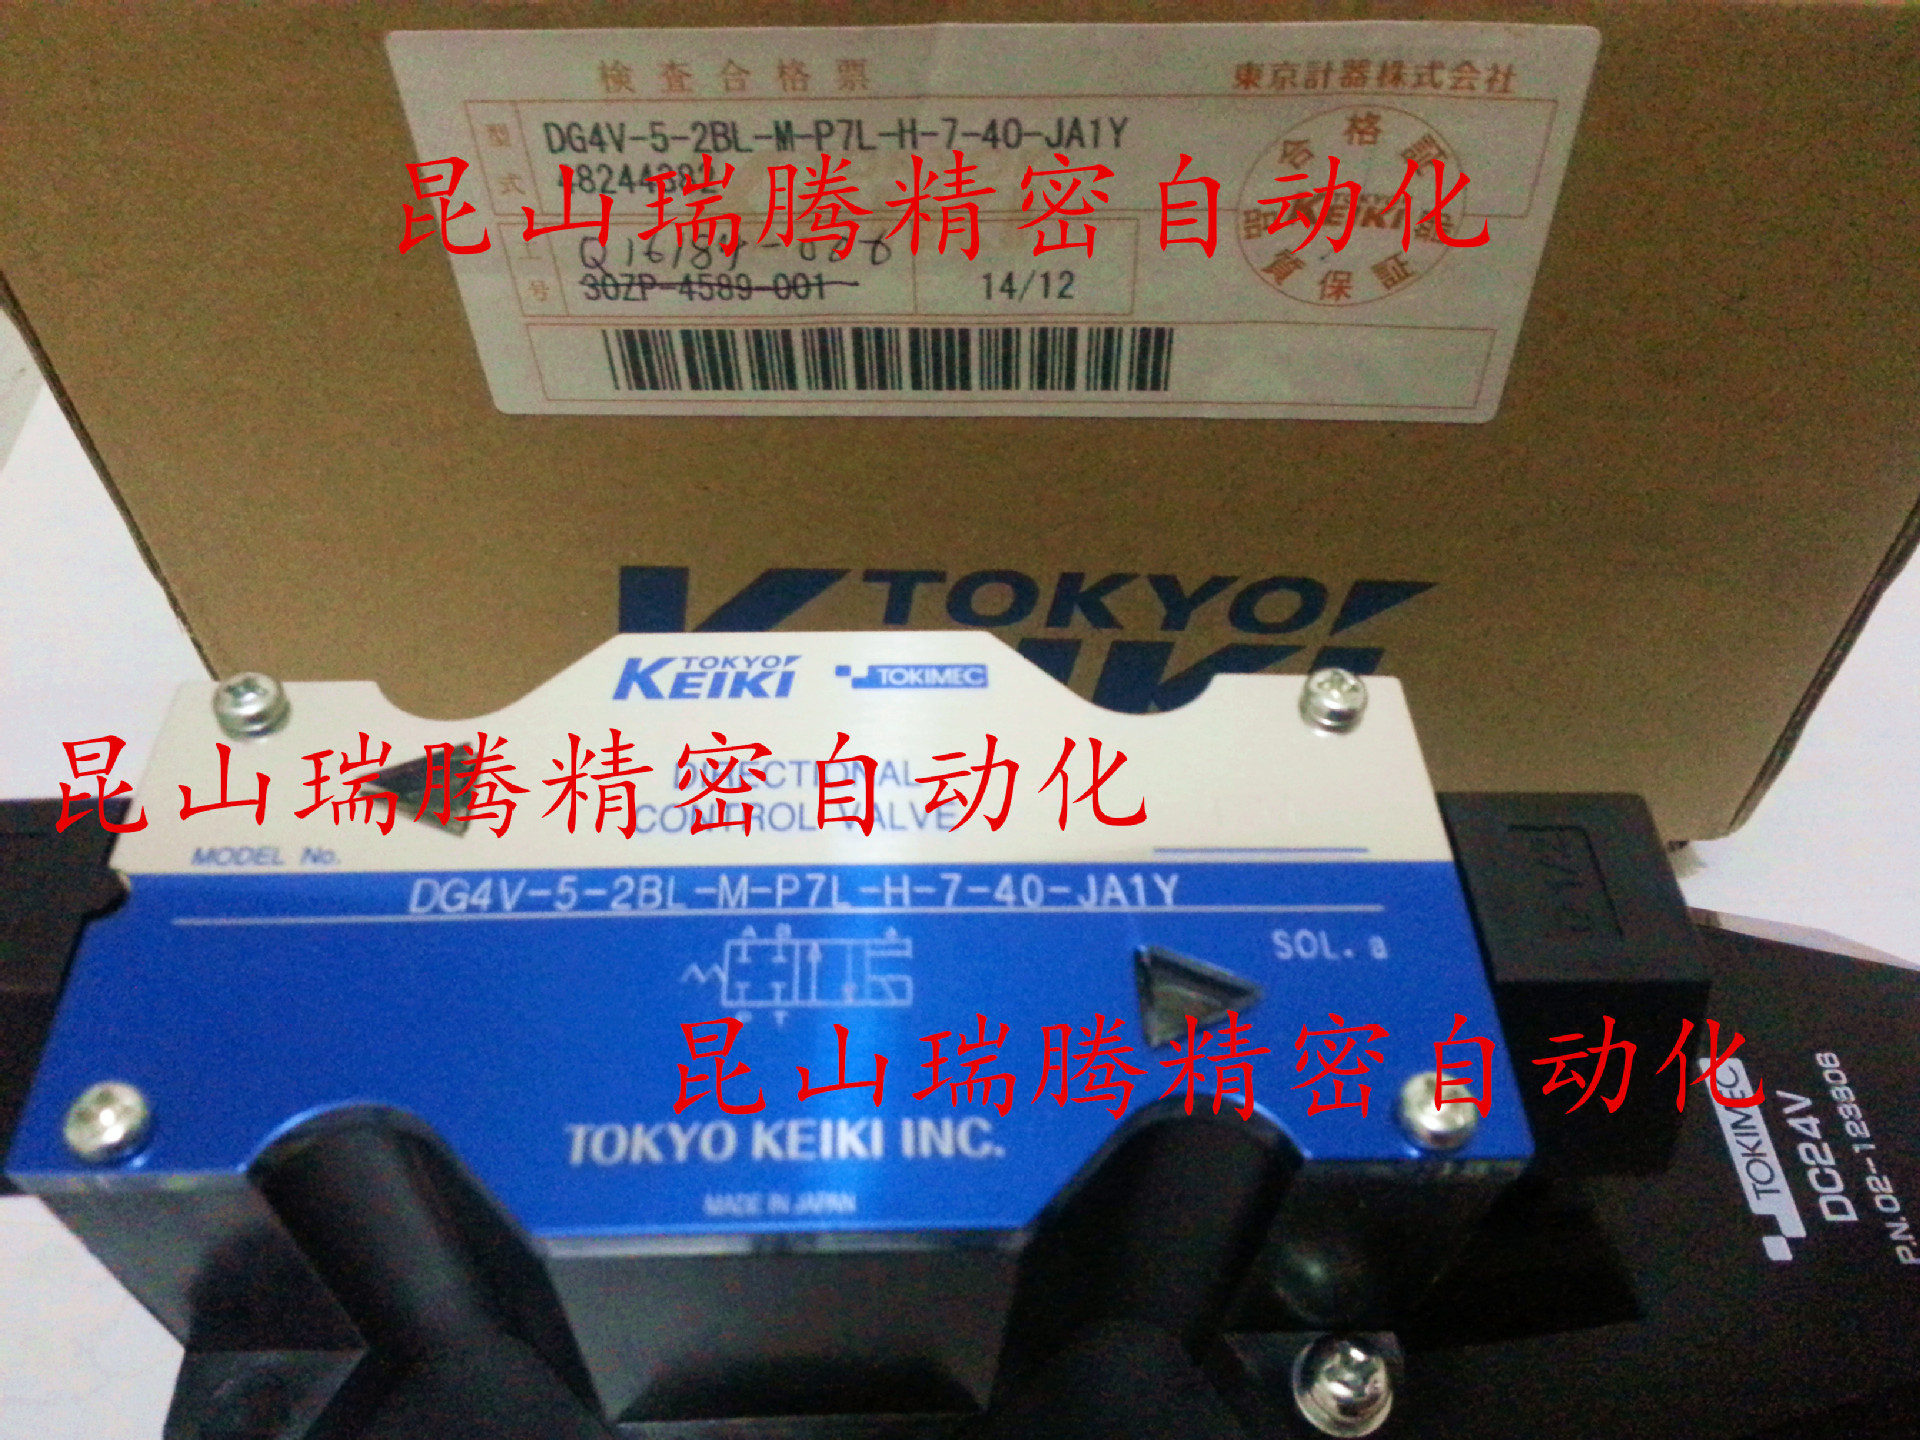 TOKYOKEIKI东京计器 <strong><strong><strong>DG4V-5-2BL-M-P7L-H-7-40-JA1Y 特殊电磁阀</strong></strong></strong>